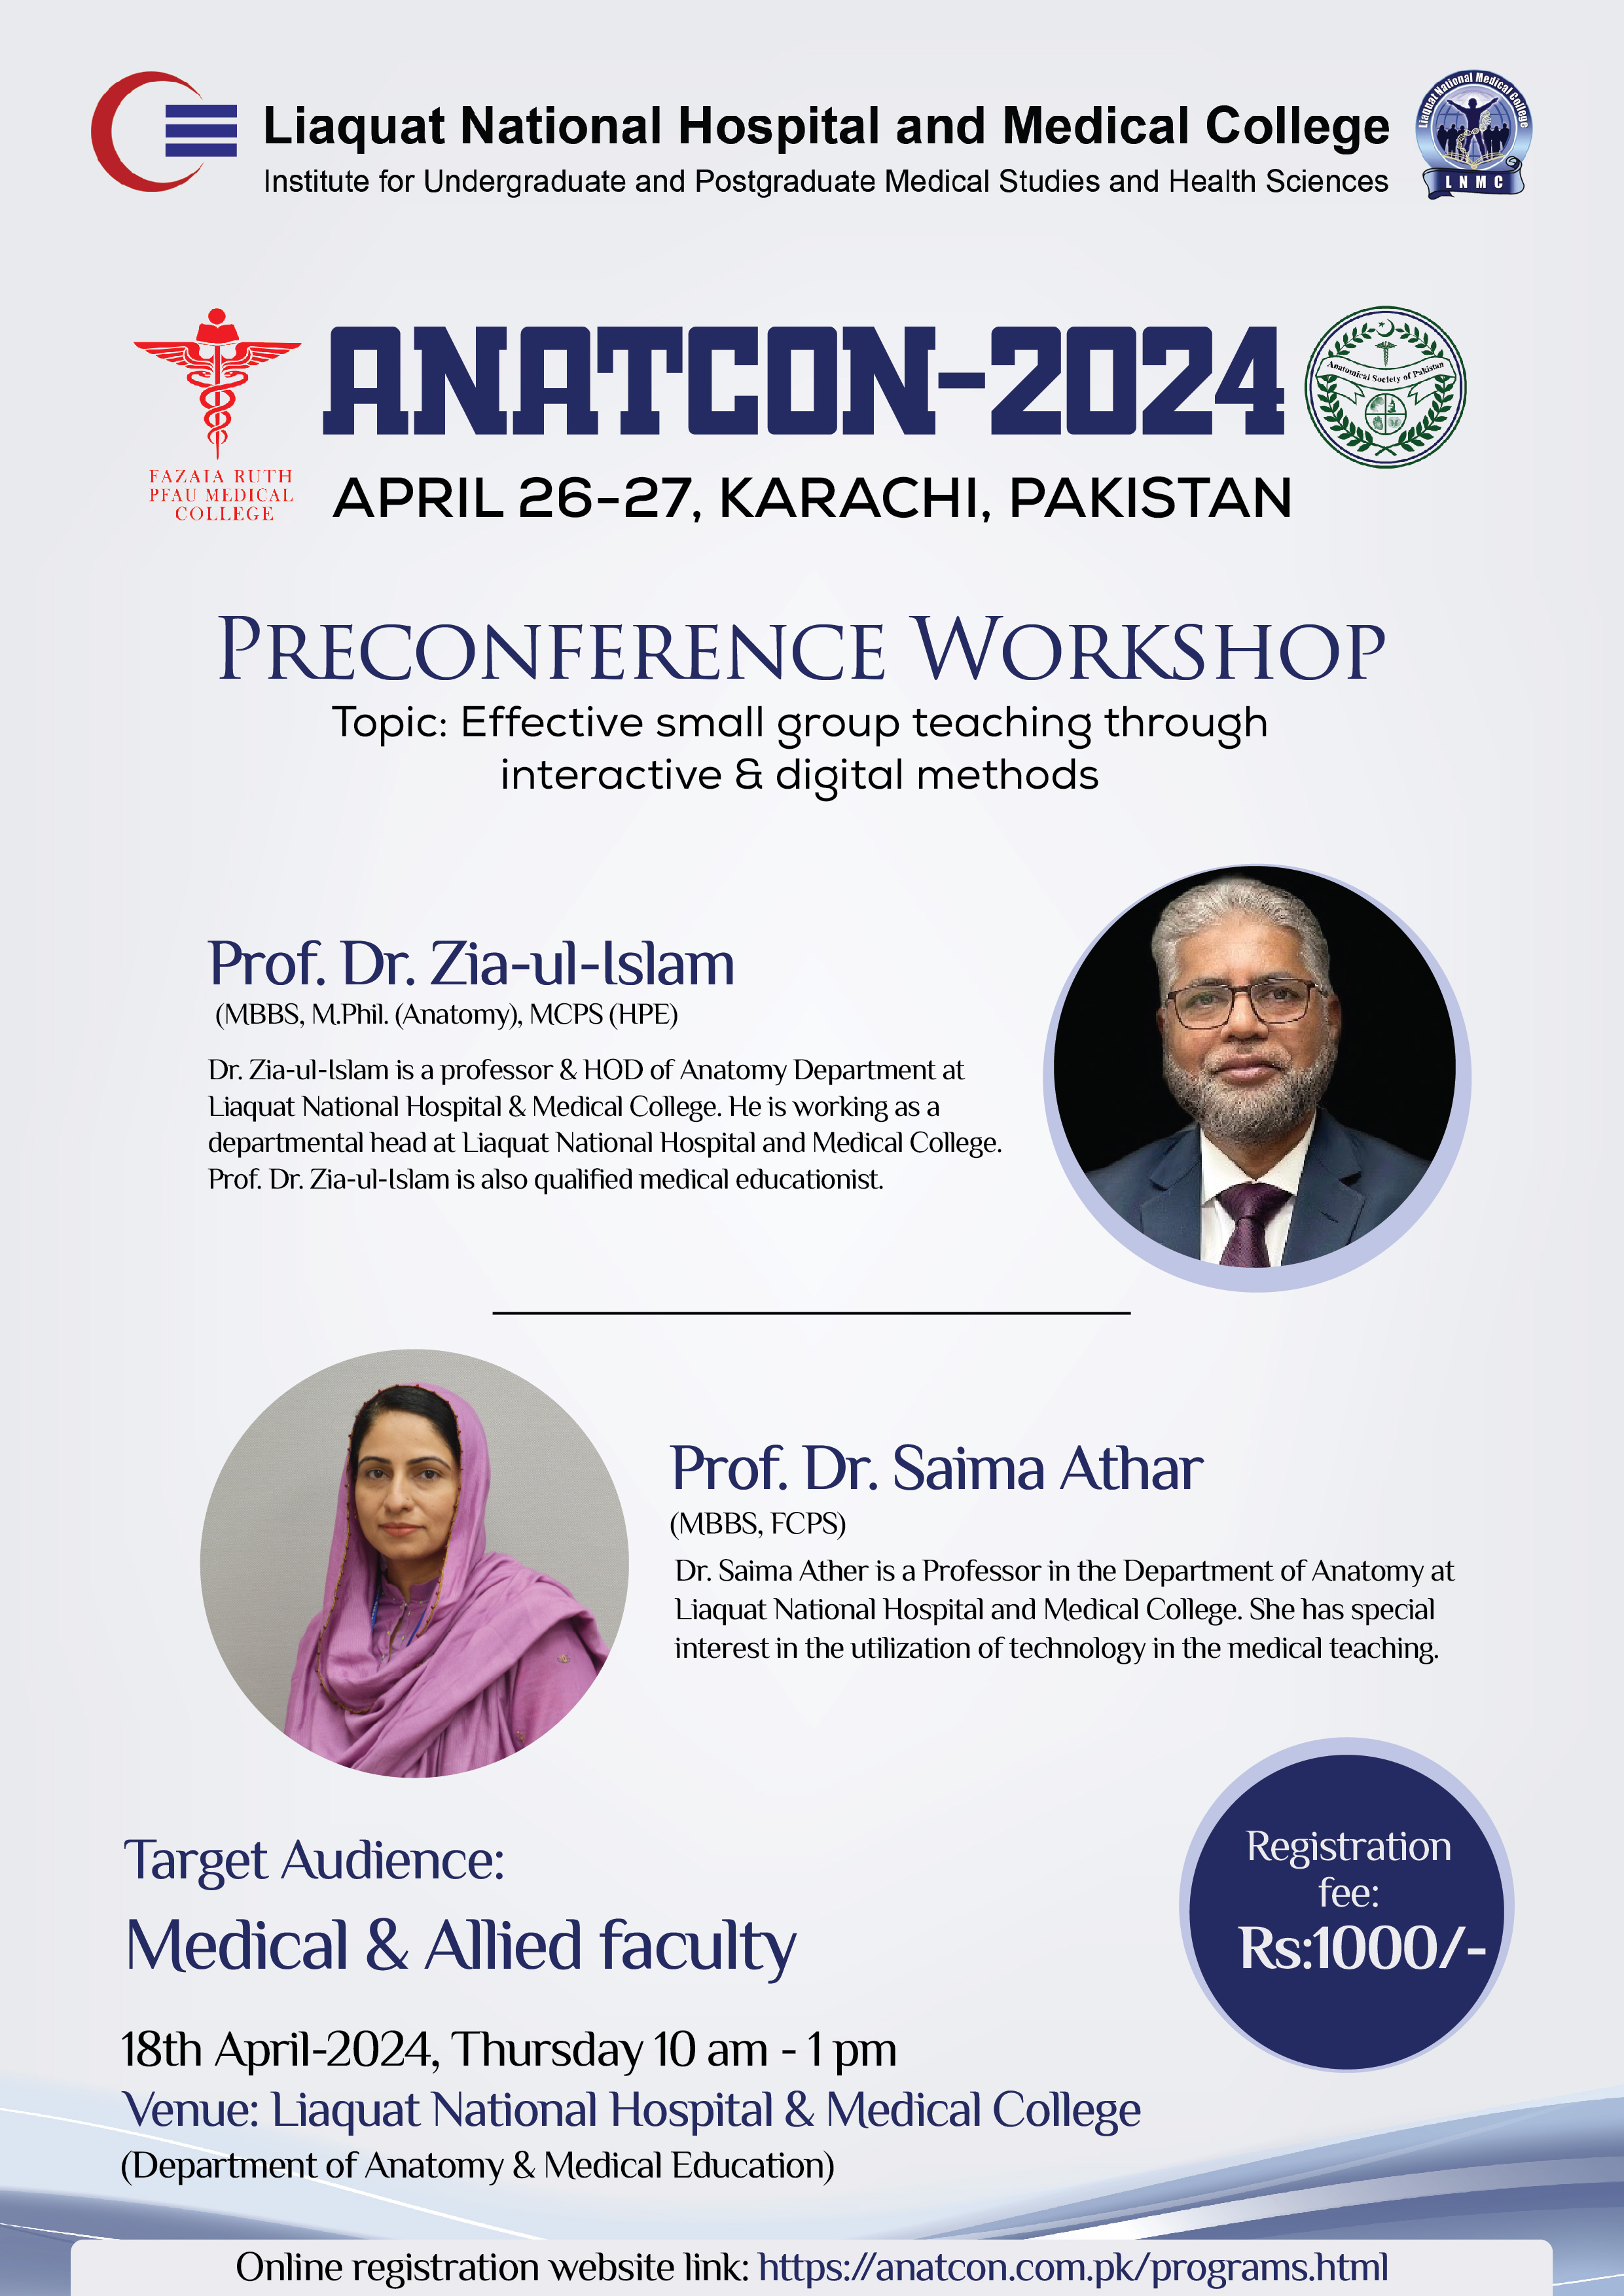 Anatcon: Pre-conference Workshop on Effective Small Group Teaching through Interactive and Digital Methods